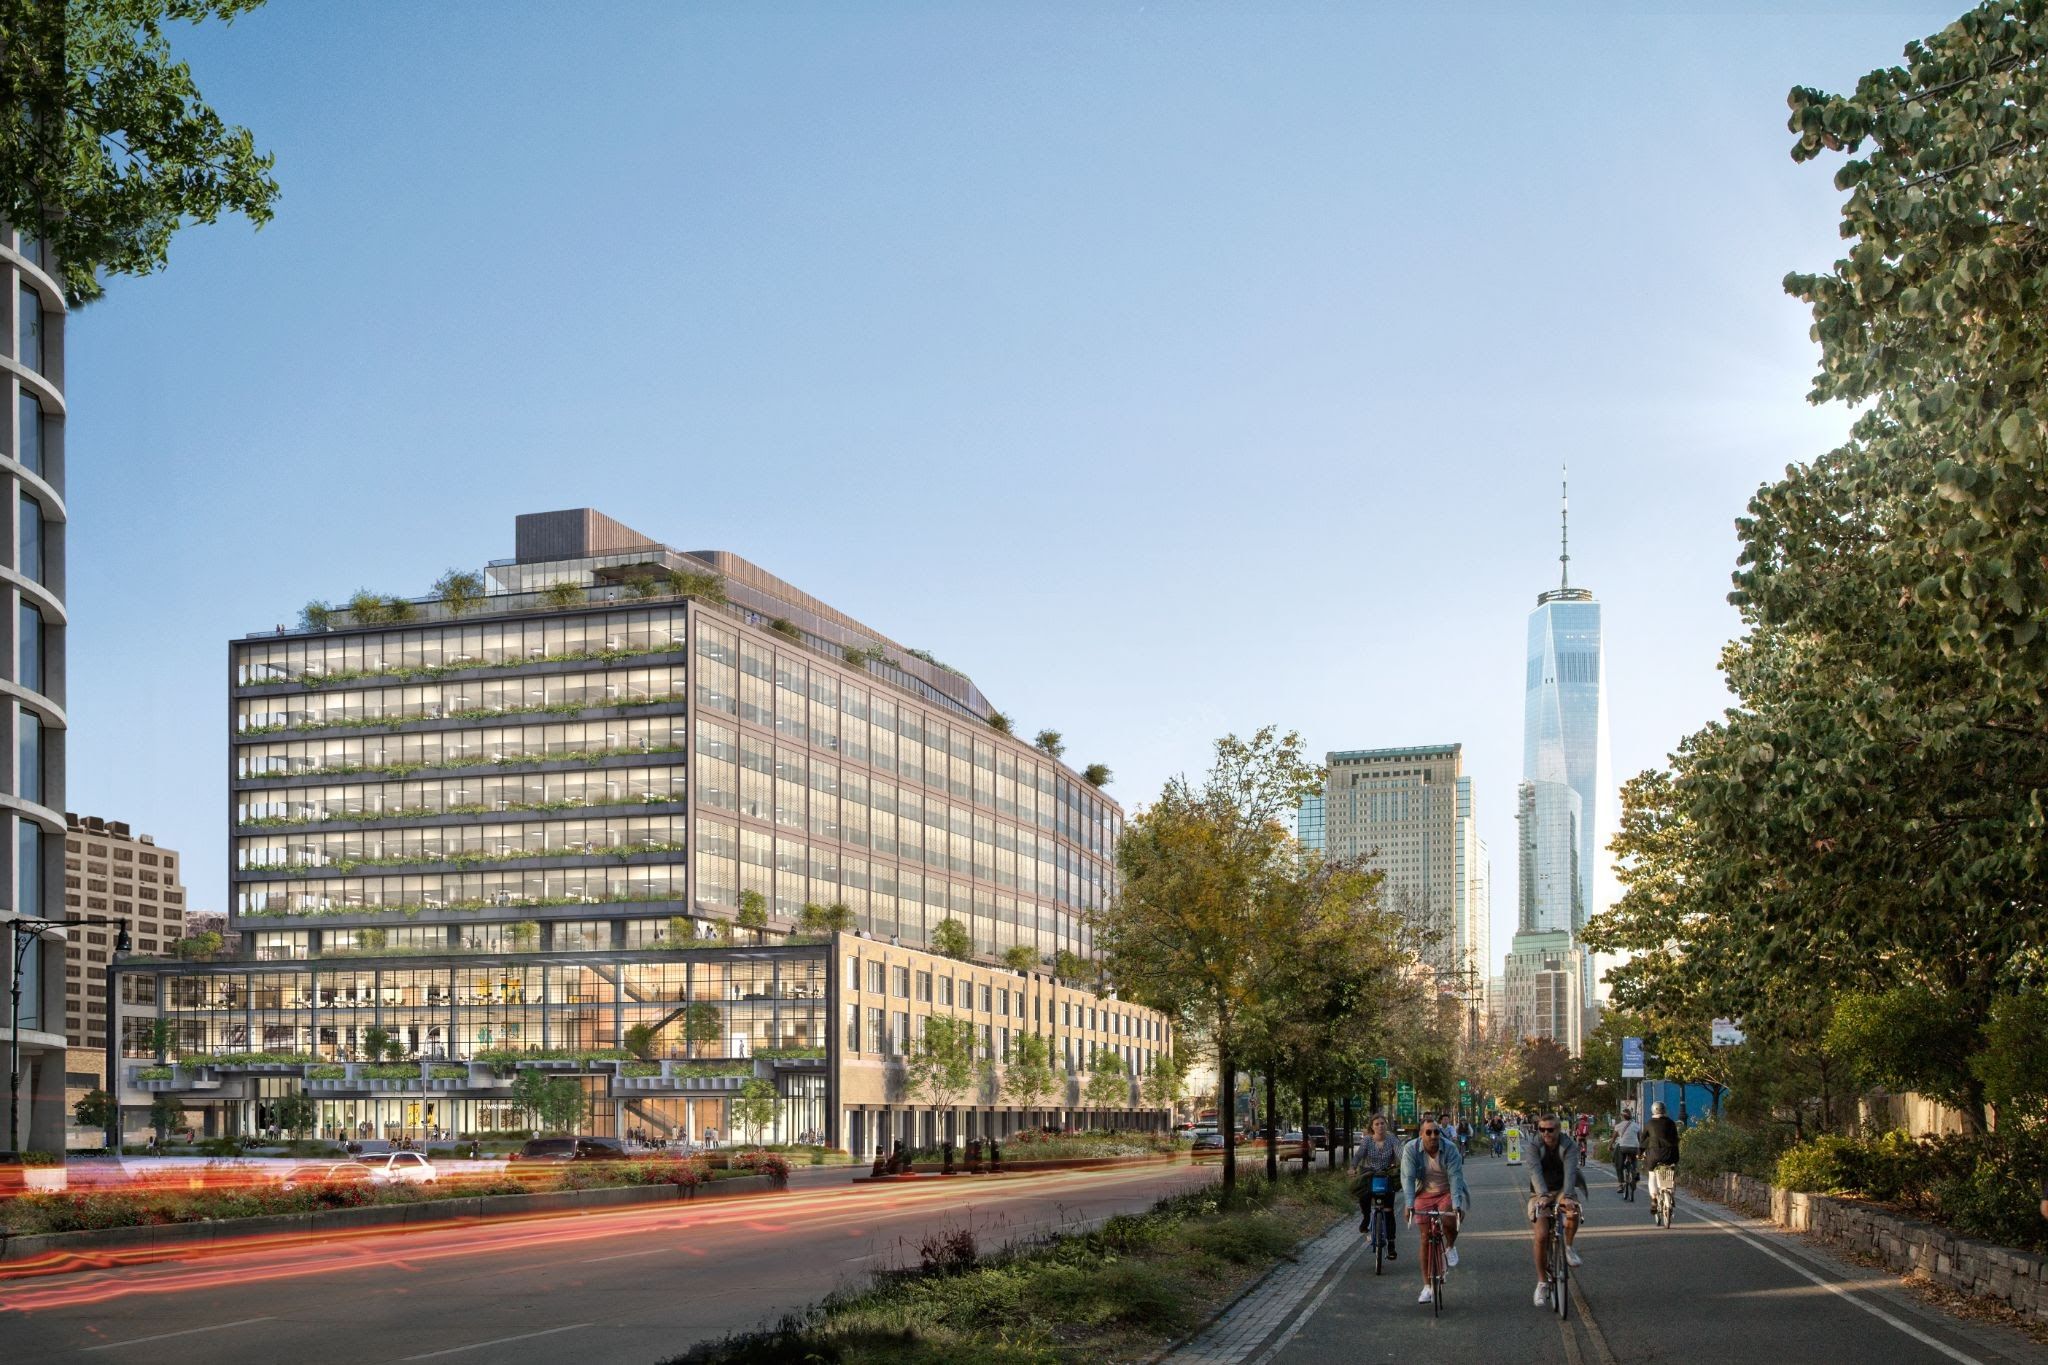 Google expands in New York with $2.1 billion office purchase